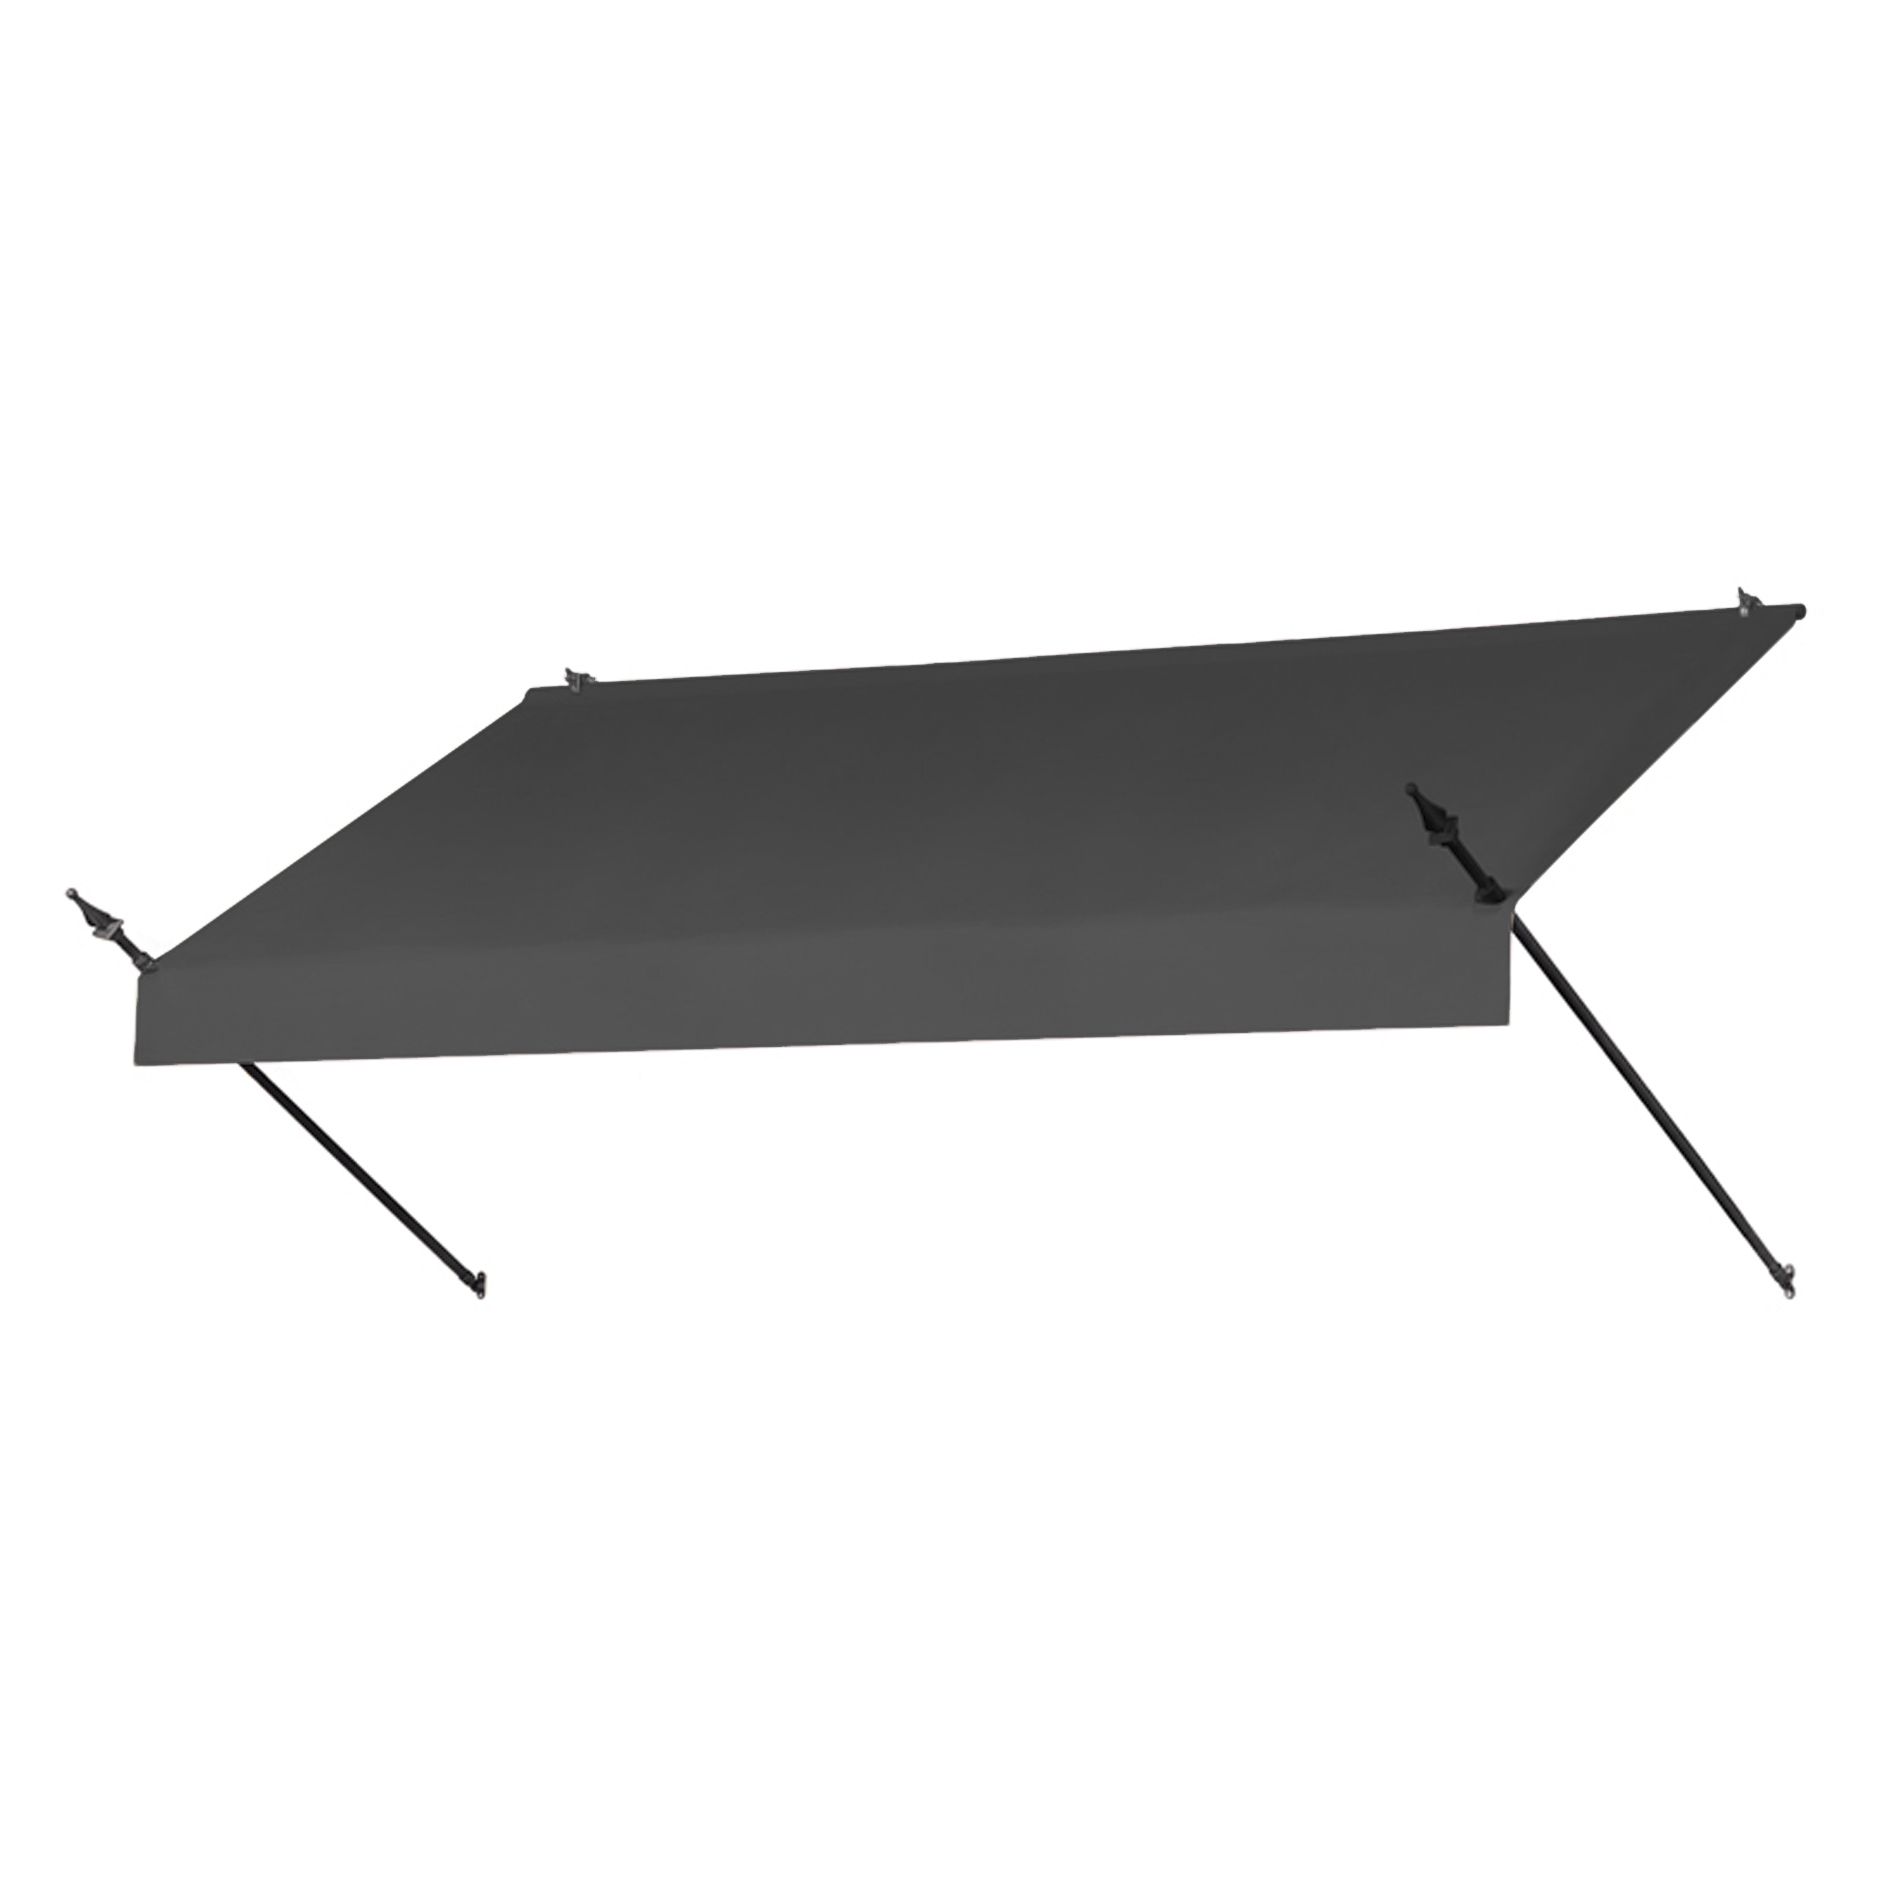 8' Designer Awnings in a Box Charcoal Gray